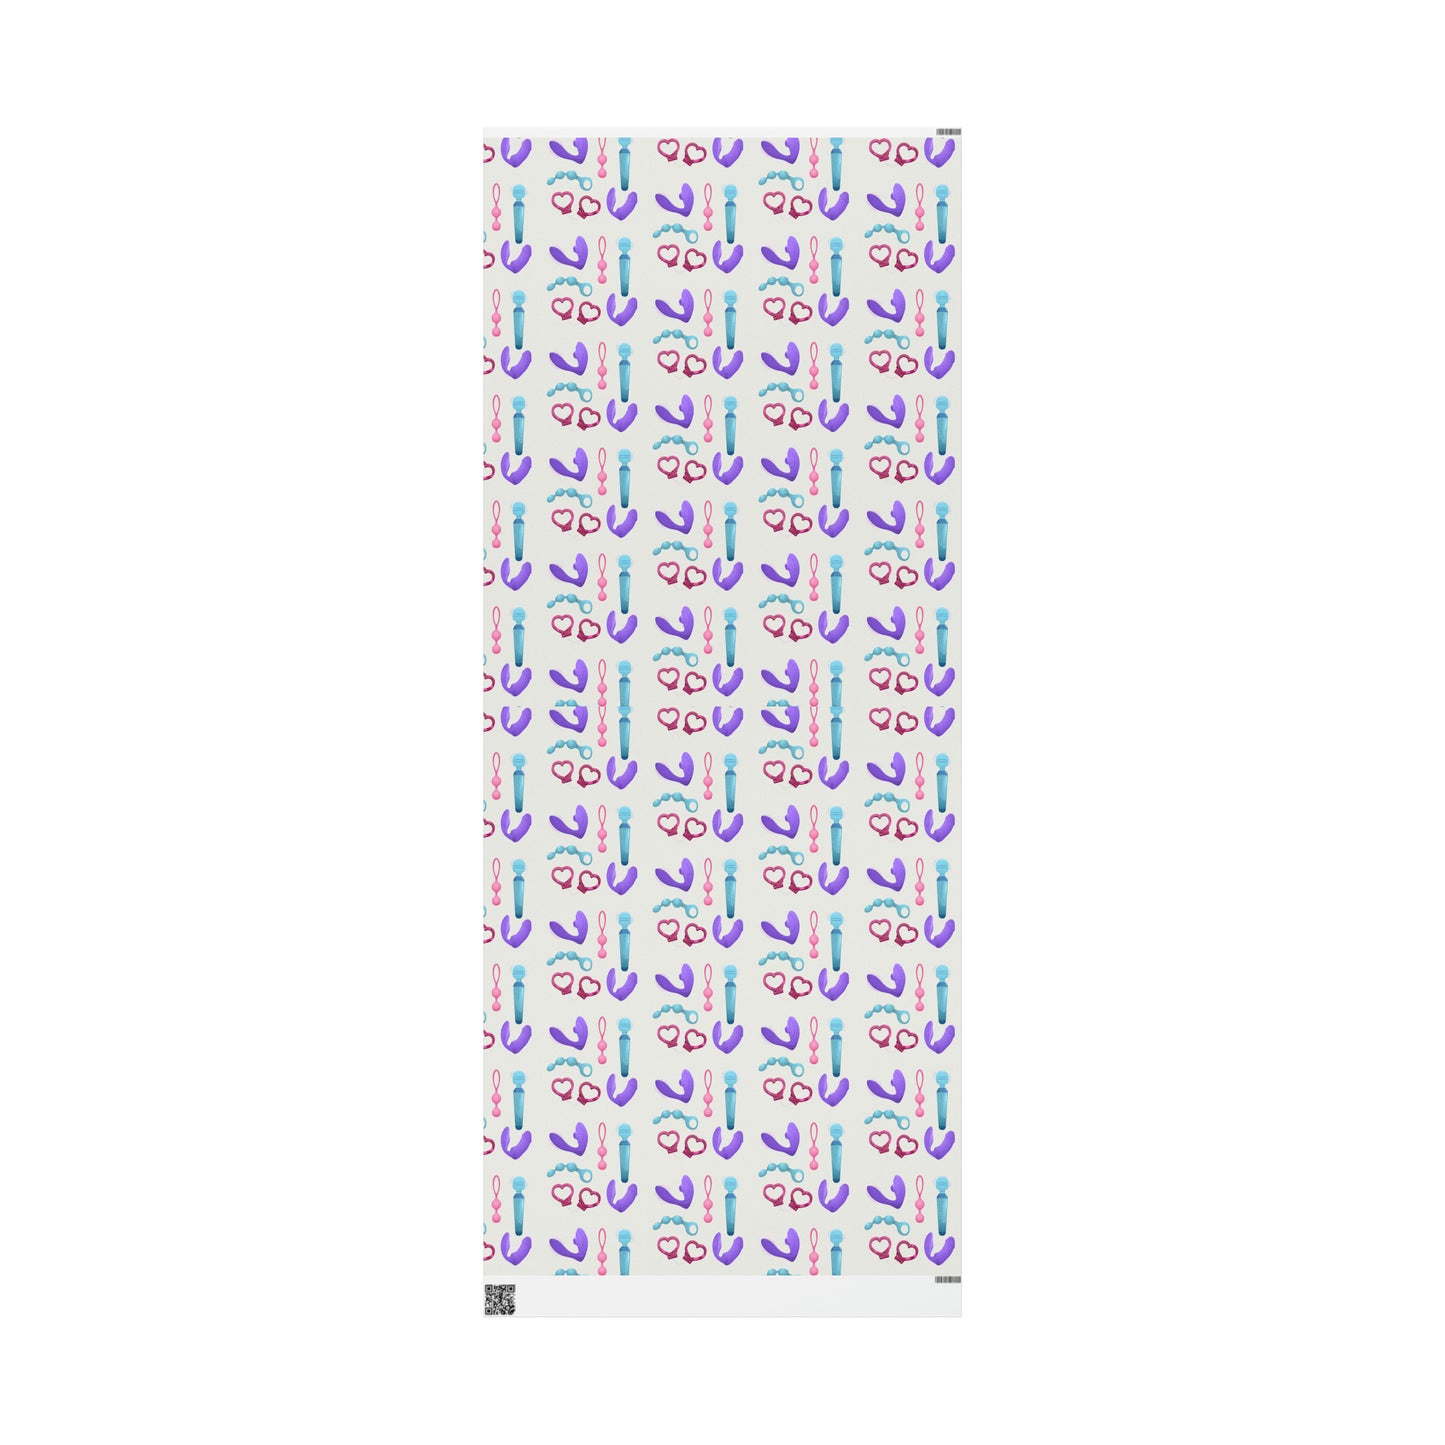 Bachelorette Party sex toy High Definition Happy Birthday gag Gift Present Wrapping Paper